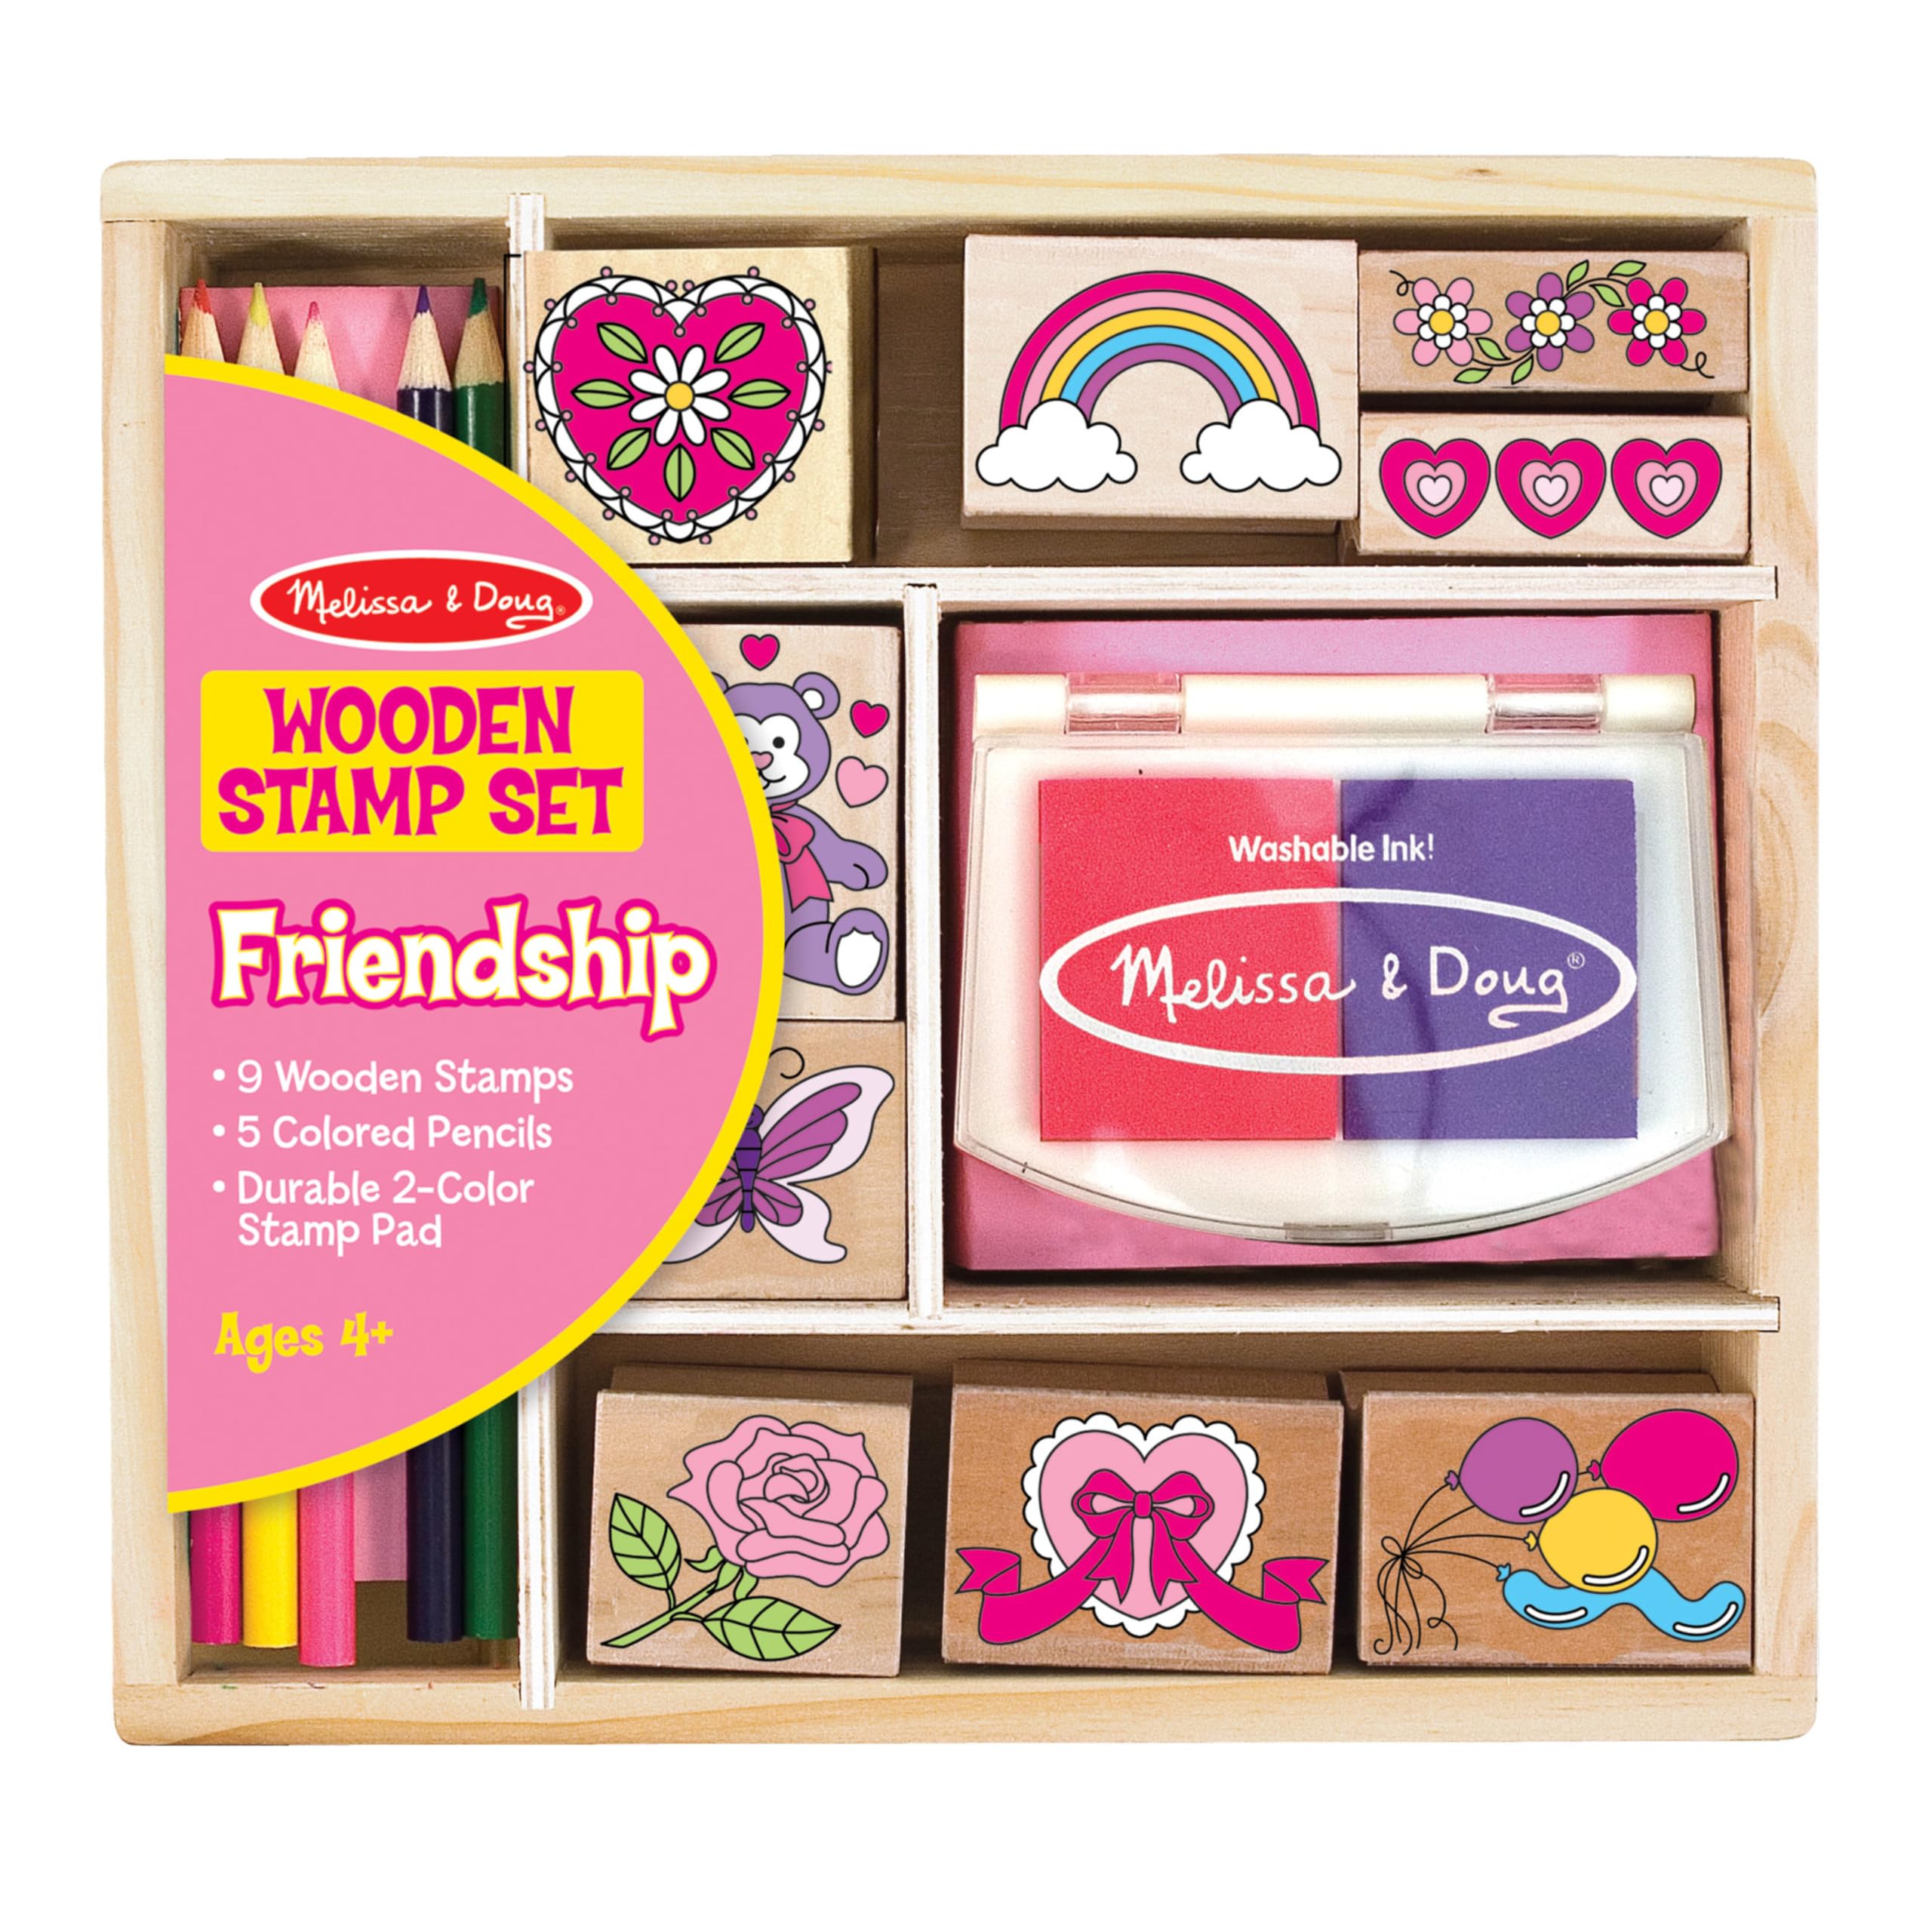 Melissa & Doug Wooden Stamp Set: Friendship - 9 Stamps, 5 Colored Pencils, and 2-Color Pad Kids Art Projects, Stamps With Washable Ink, Hearts Rainbows For Ages 4+